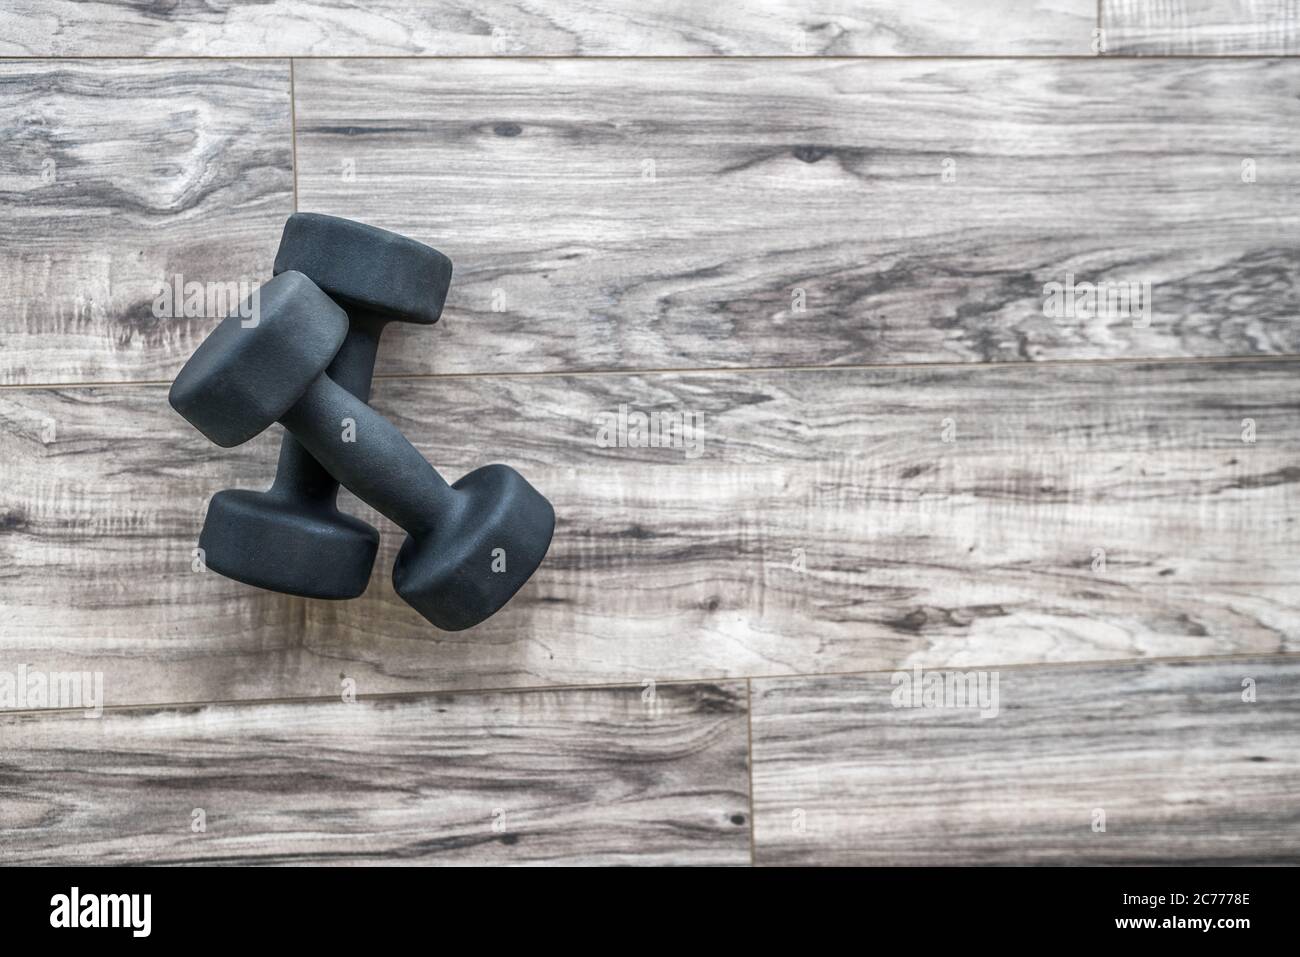 Training at home fitness concept: dumbbell weights on wood floor at fitness gym . Weight loss and health. Sport fit lifestyle Stock Photo